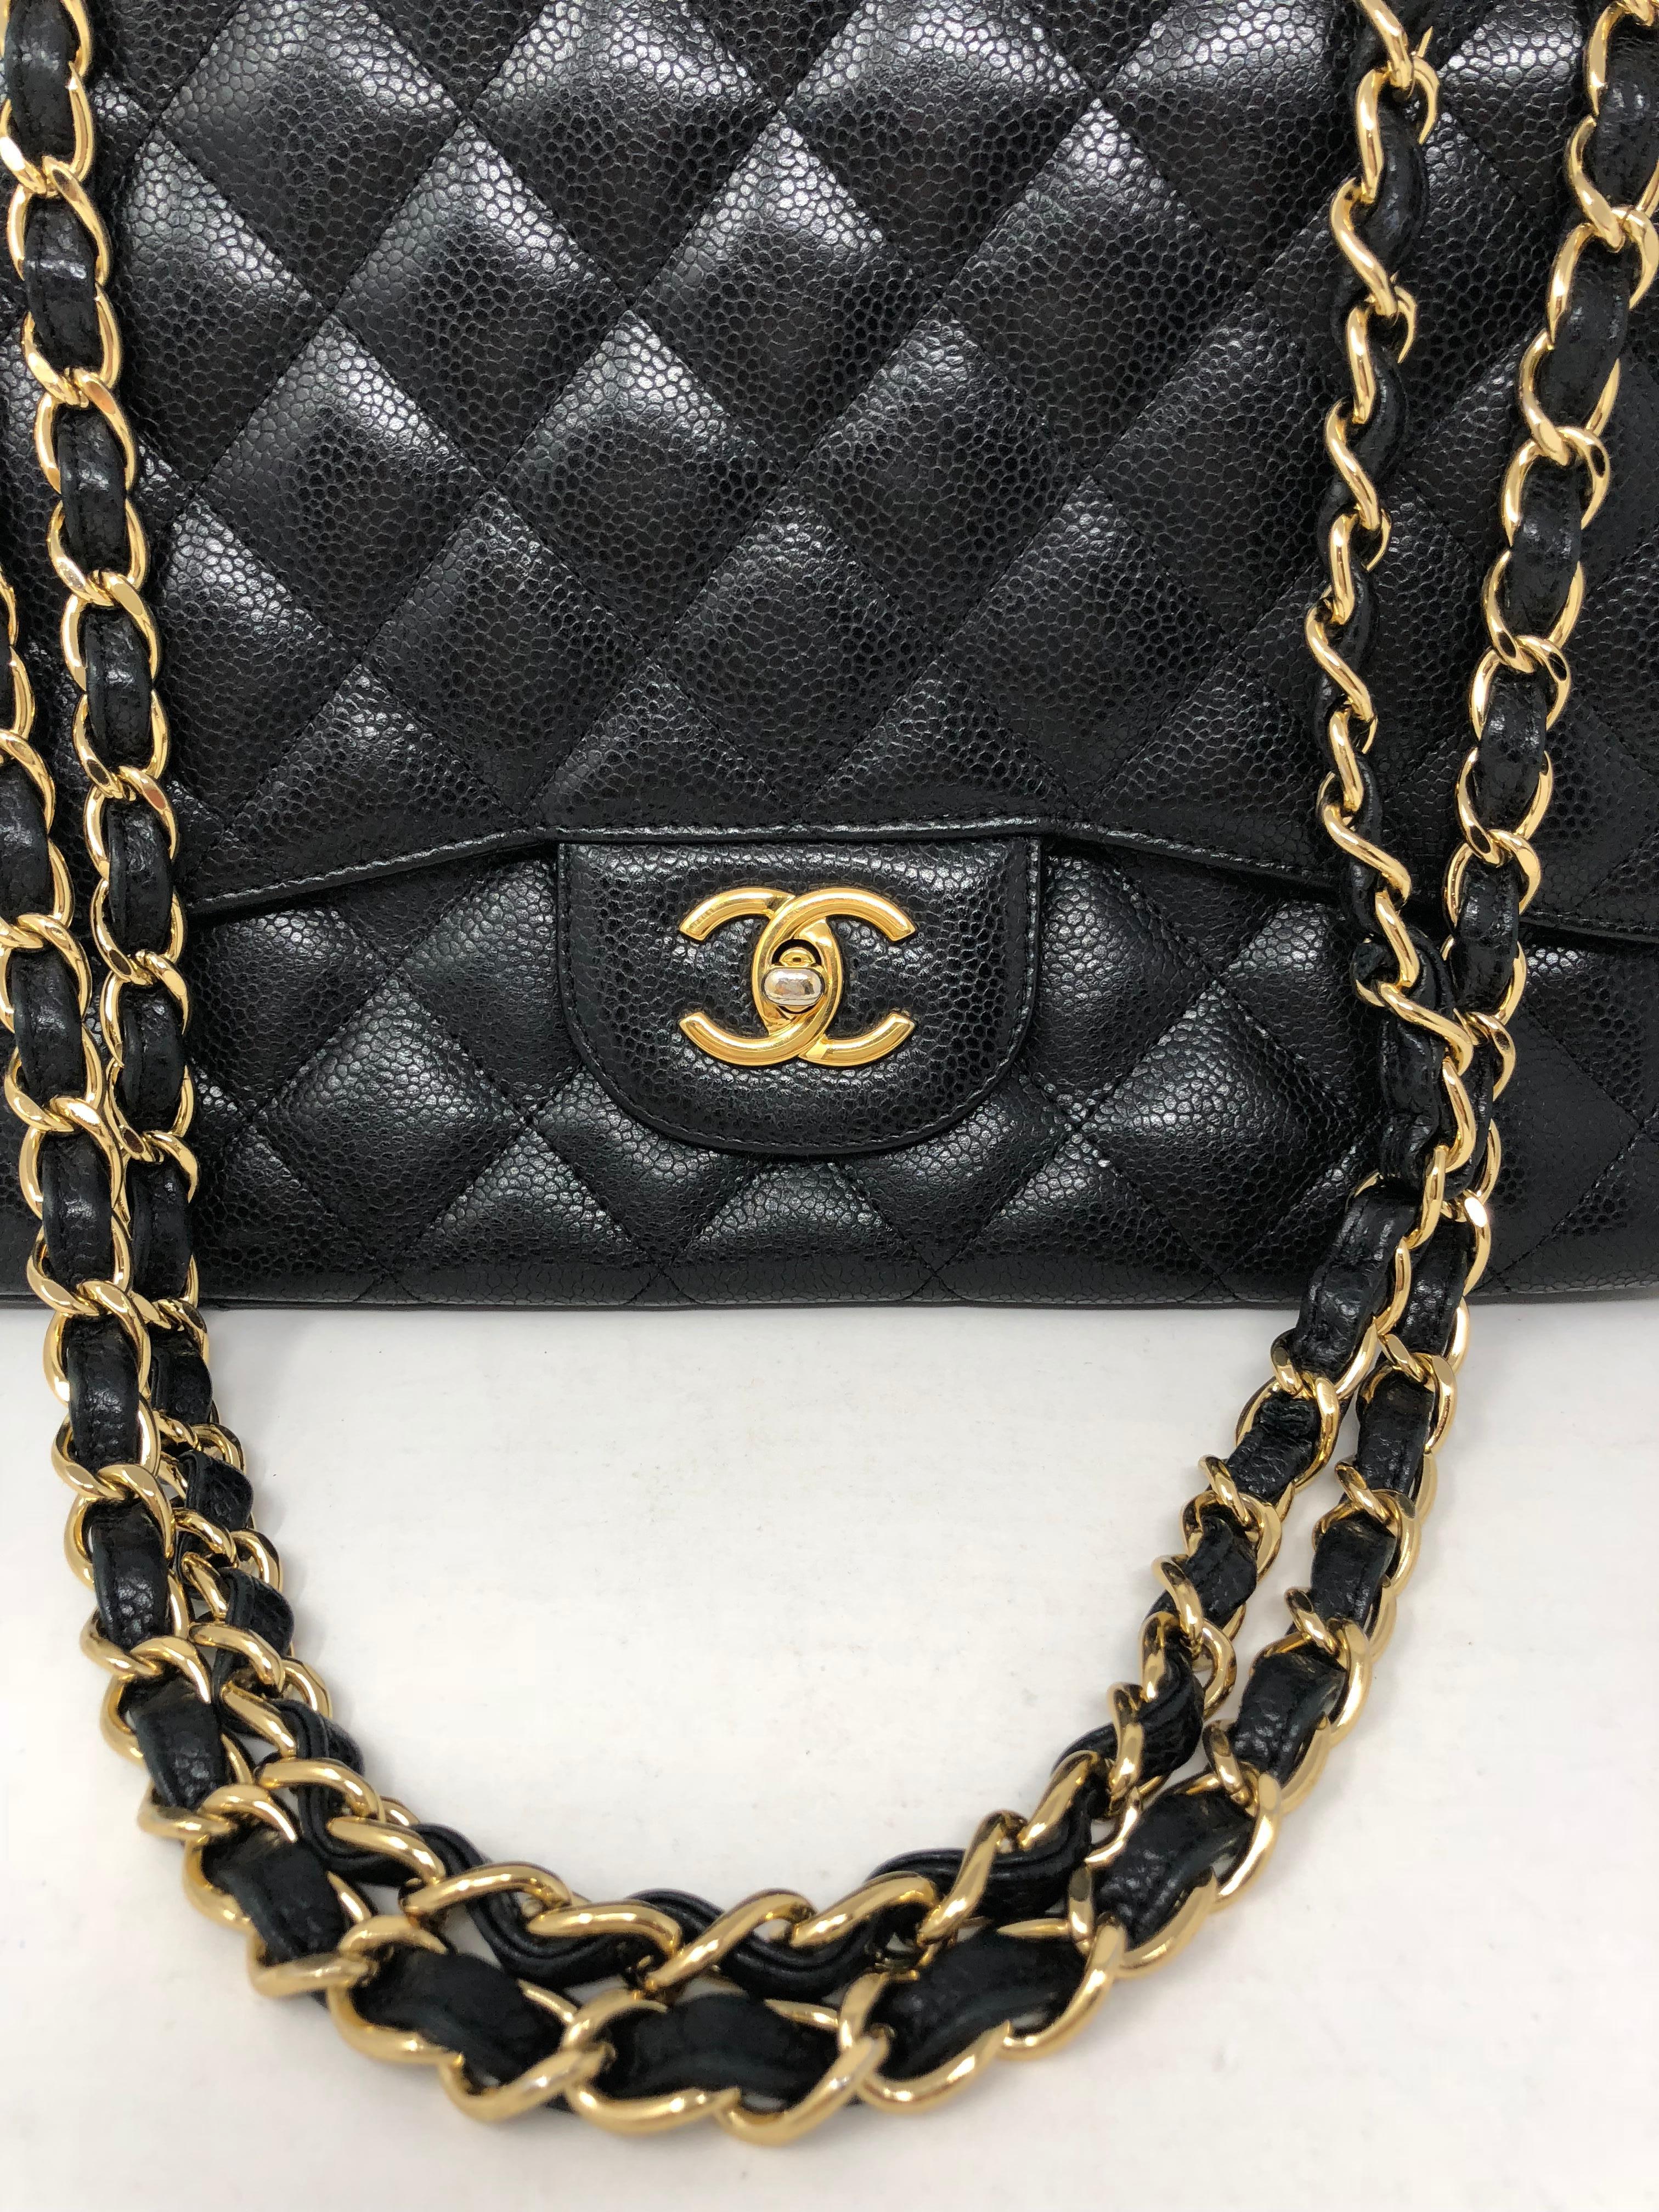 Chanel Black Jumbo Caviar Single Flap Bag. Gold hardware. Good condition. Only wear is on the clasp. Gold has turned a little more silver tone from use. The leather is in great condition. Most wanted size. Can be worn as a doubled strap or be worn